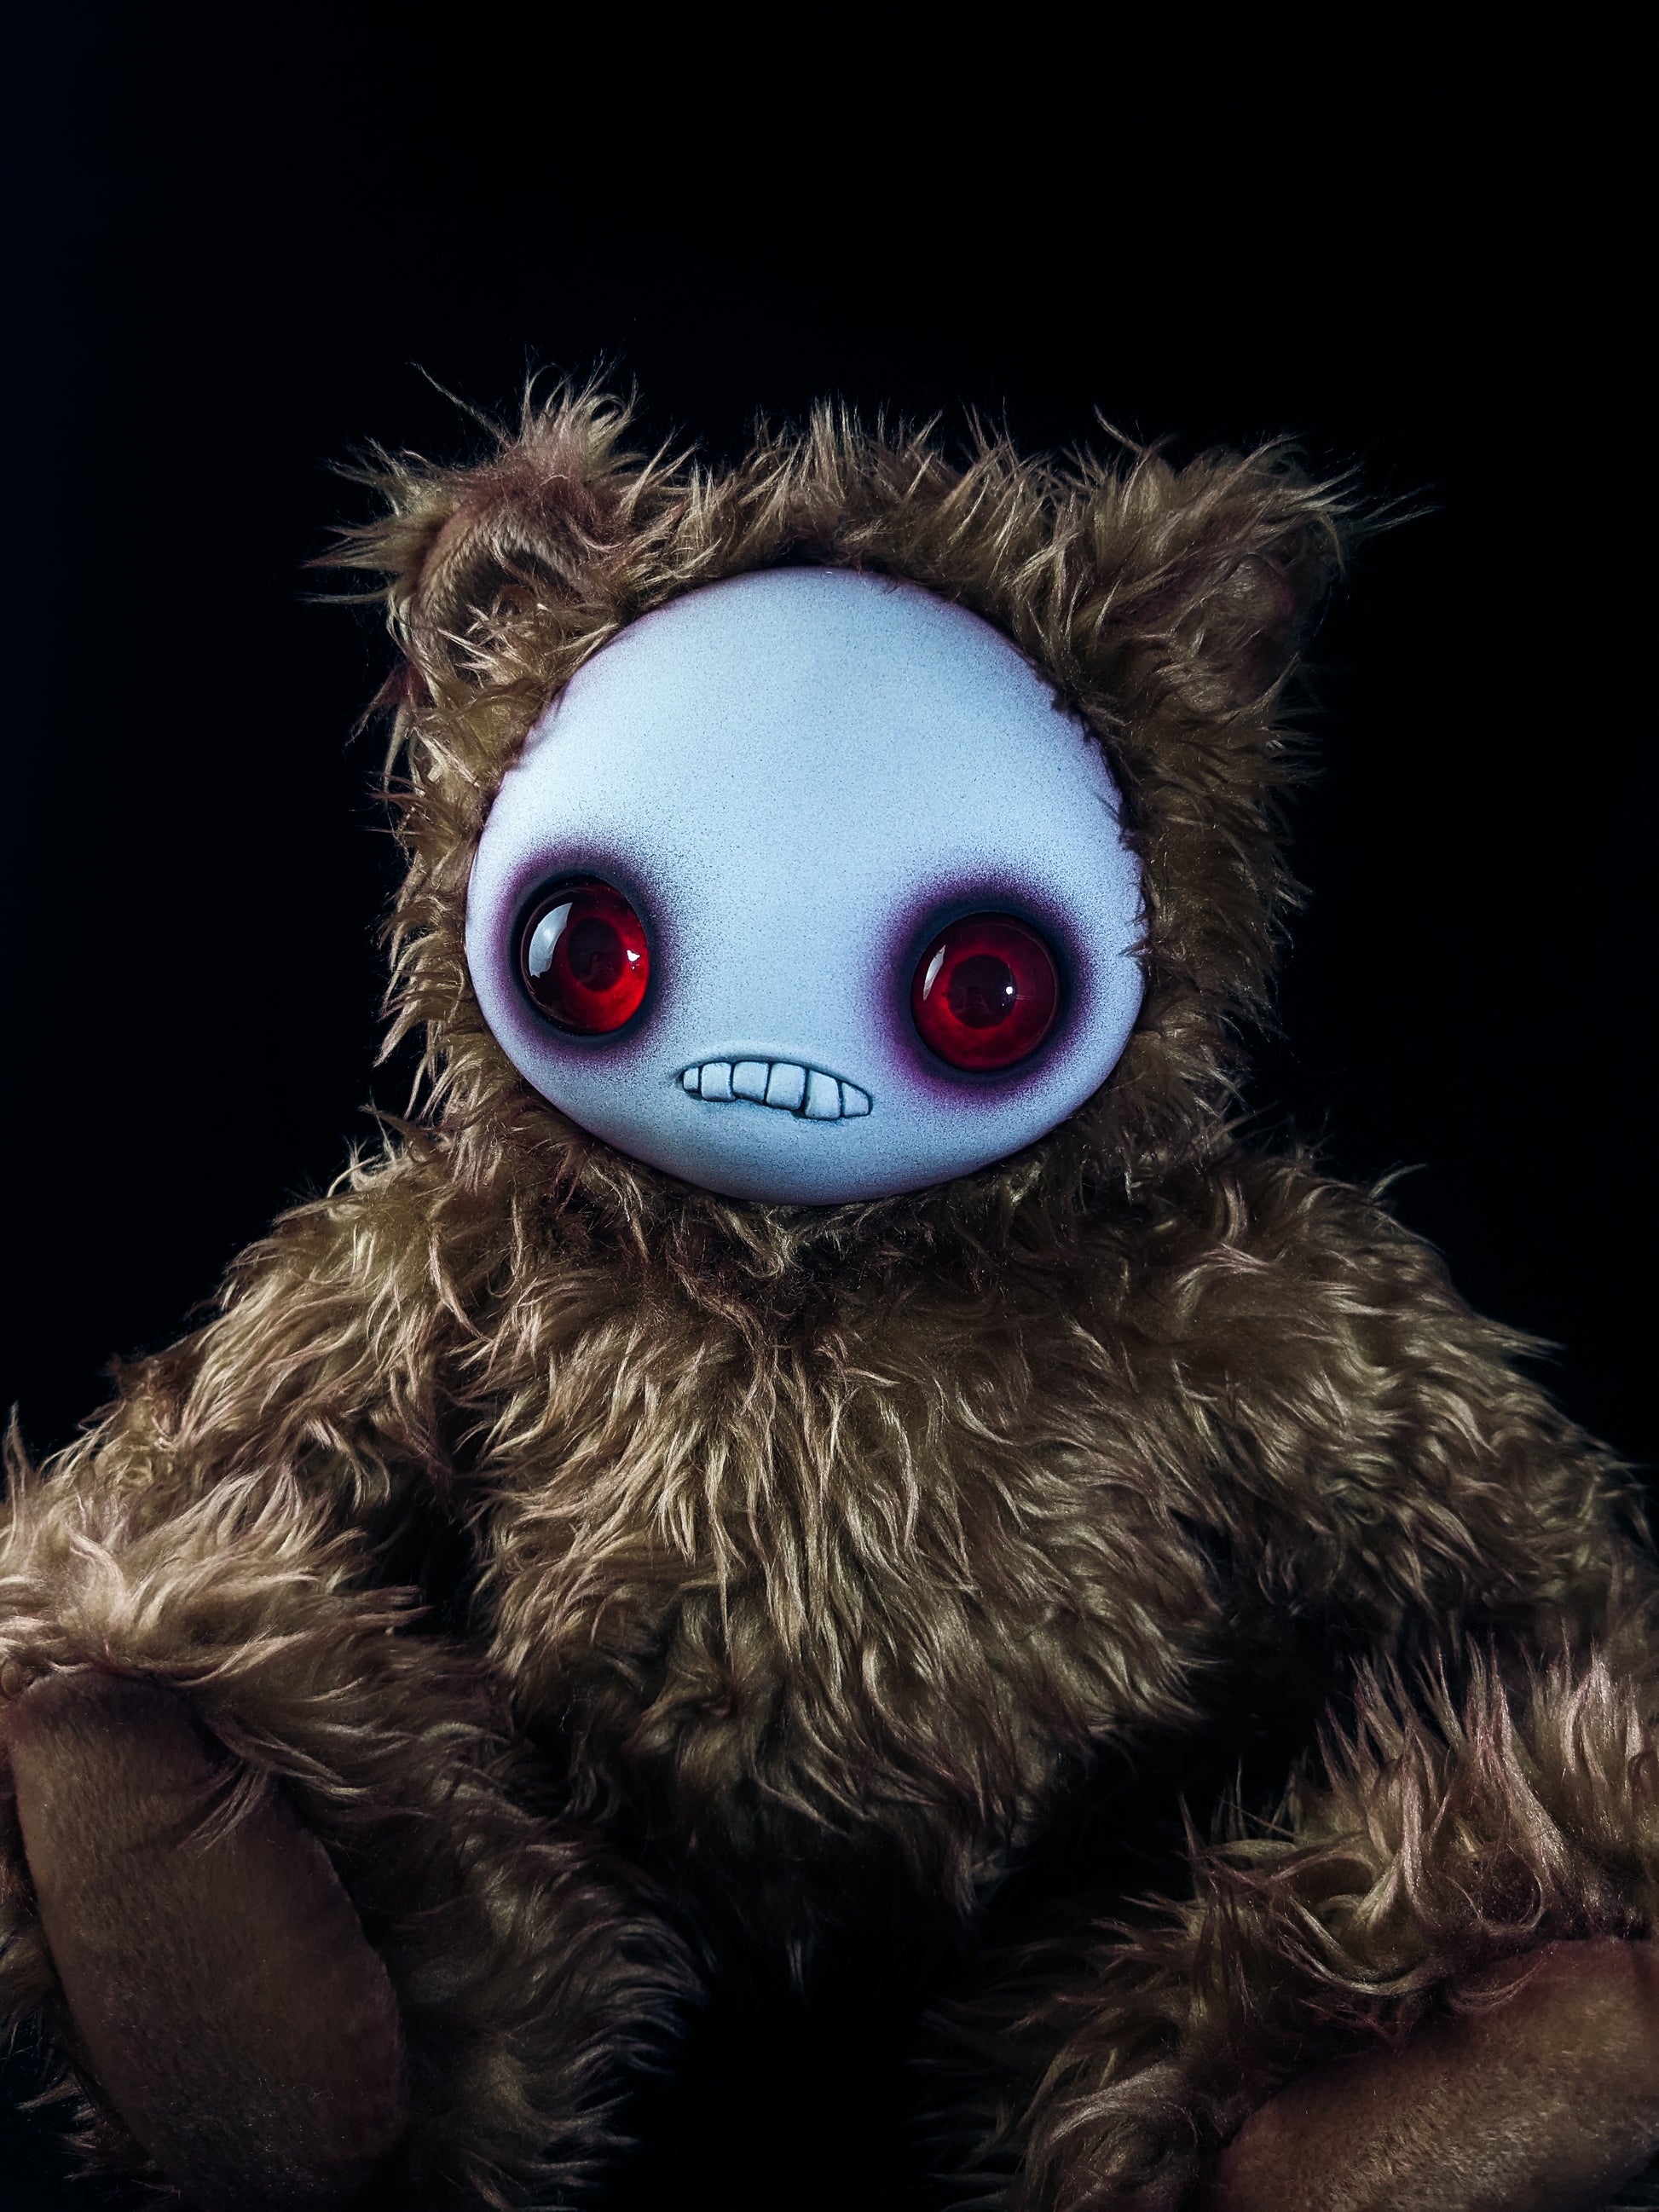 Teething Pains: JITTERS - CRYPTCRITZ Handcrafted Creepy Monster Art Doll Plush Toy for Unhinged Individuals